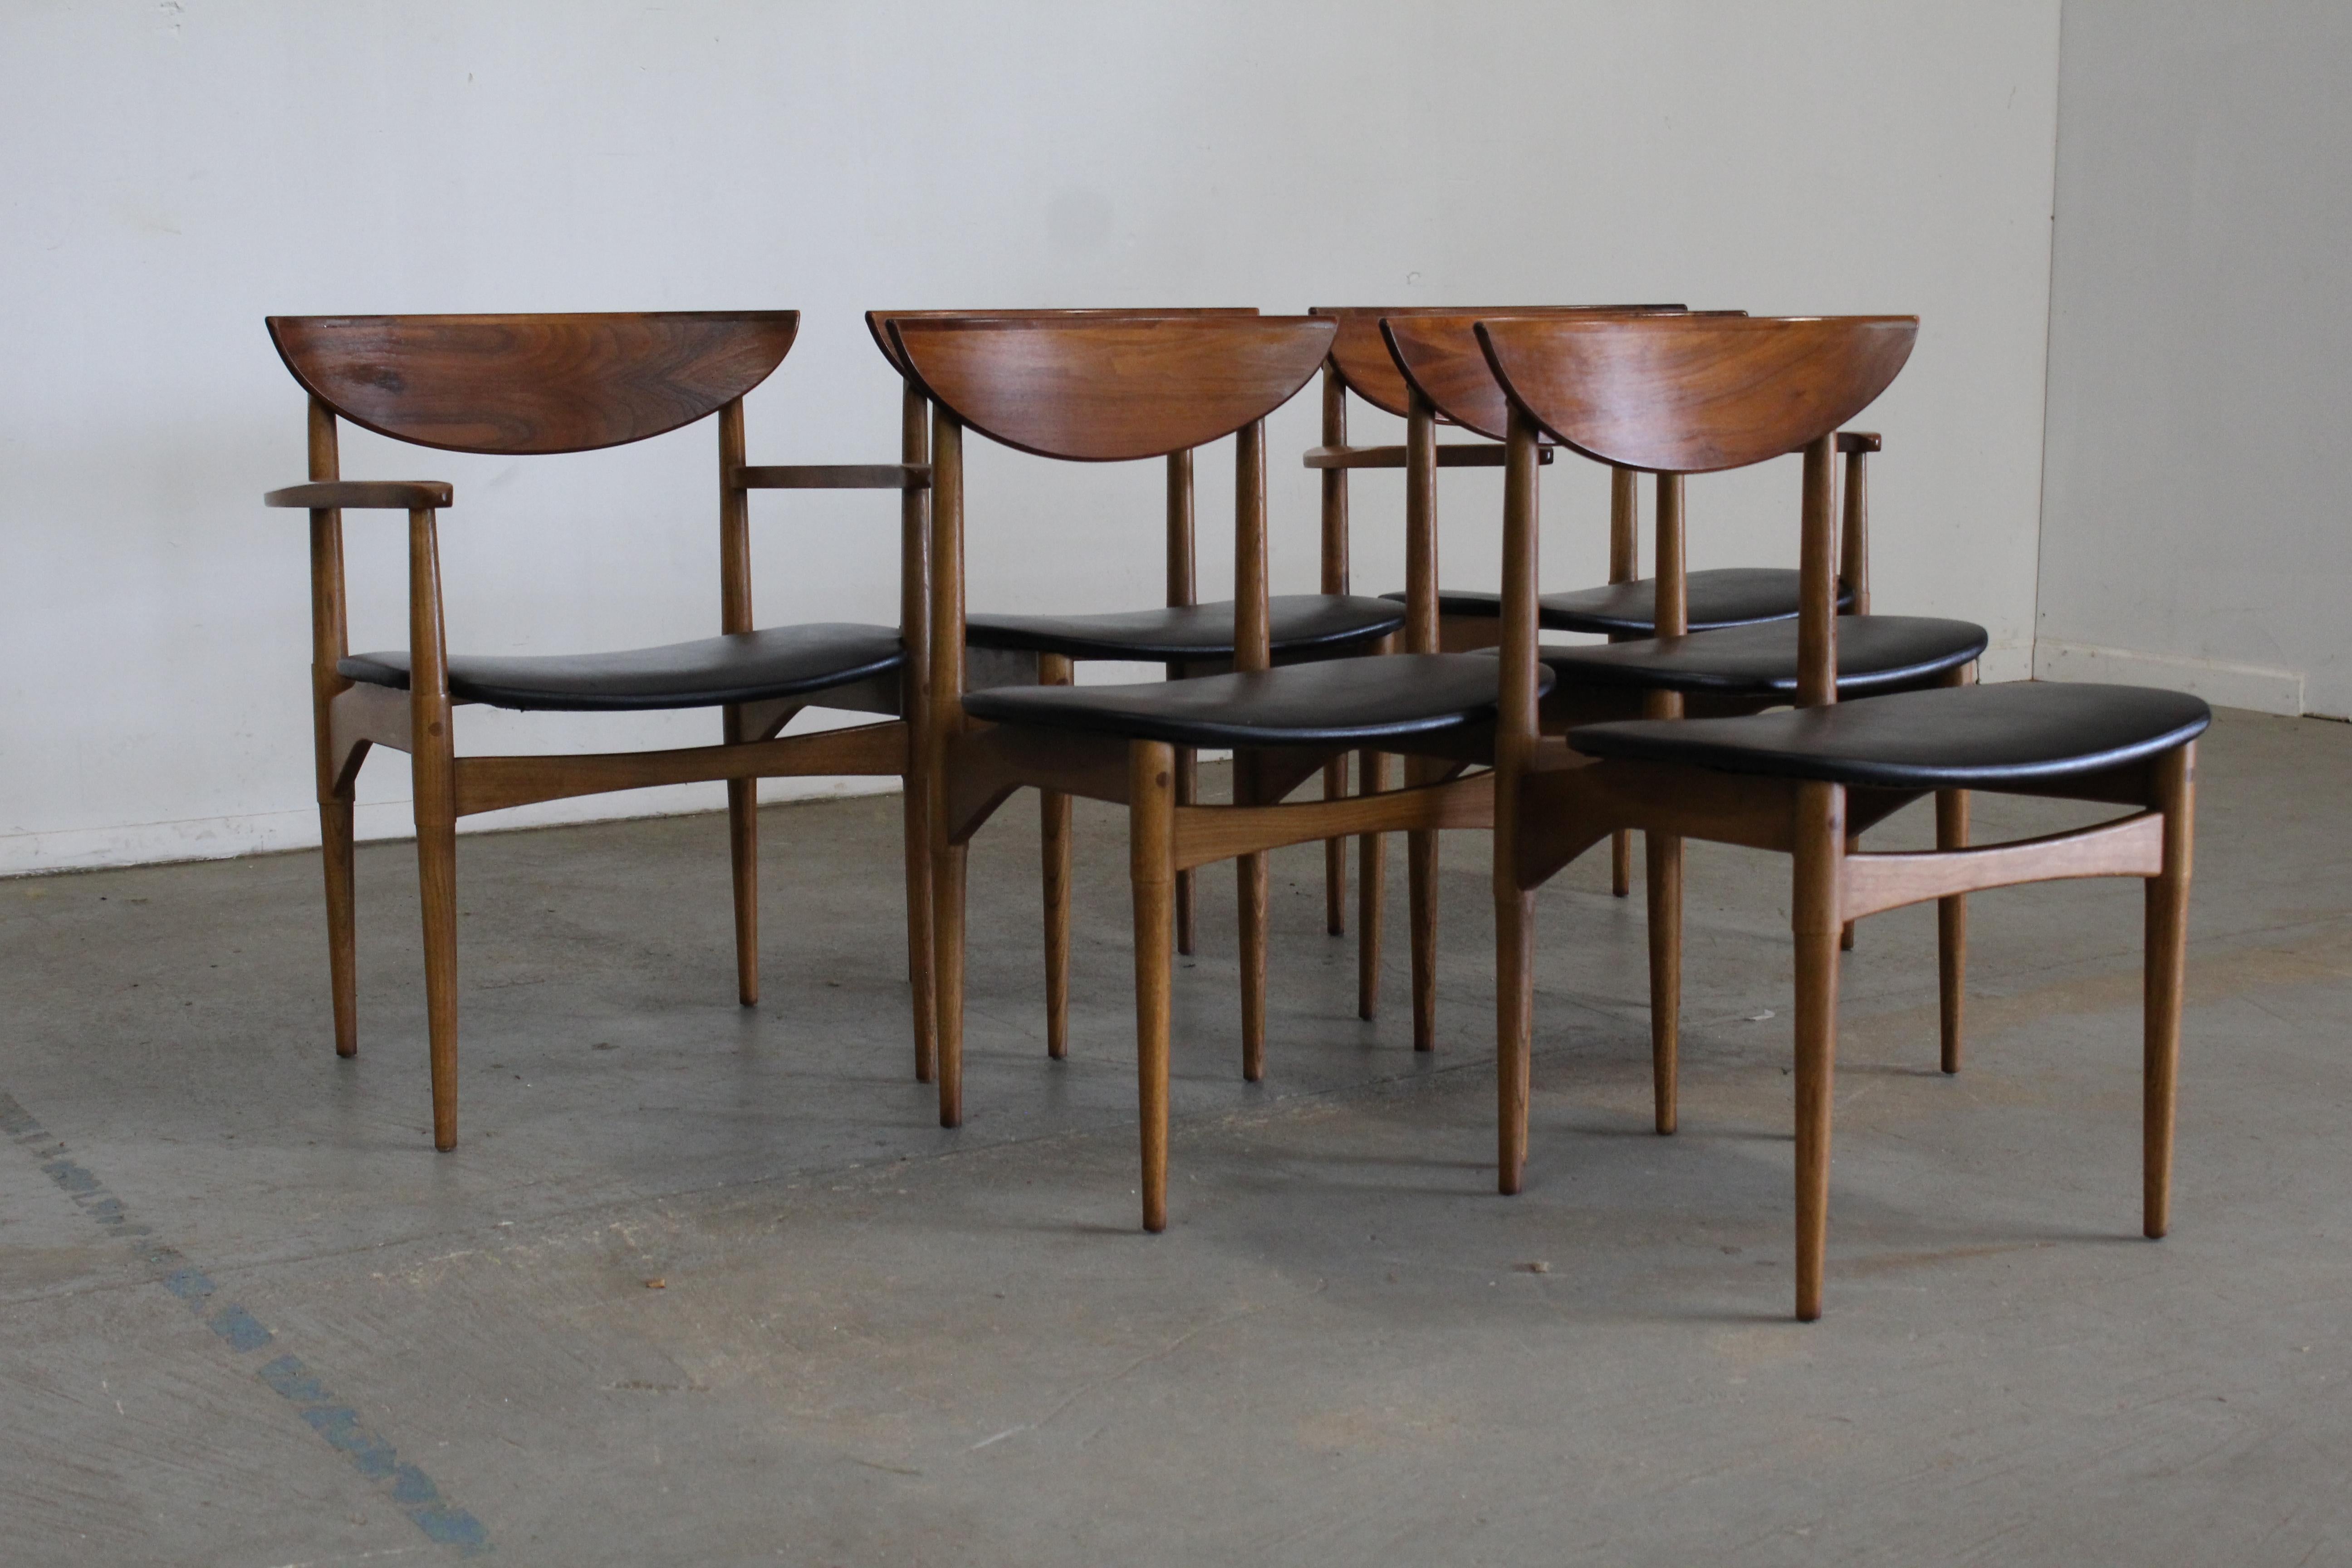 Offered is a Set of 6 Mid-Century Danish Modern Warren Church Lane Perception Dining Chairs. These chairs were designed by Warren Church for Lane 